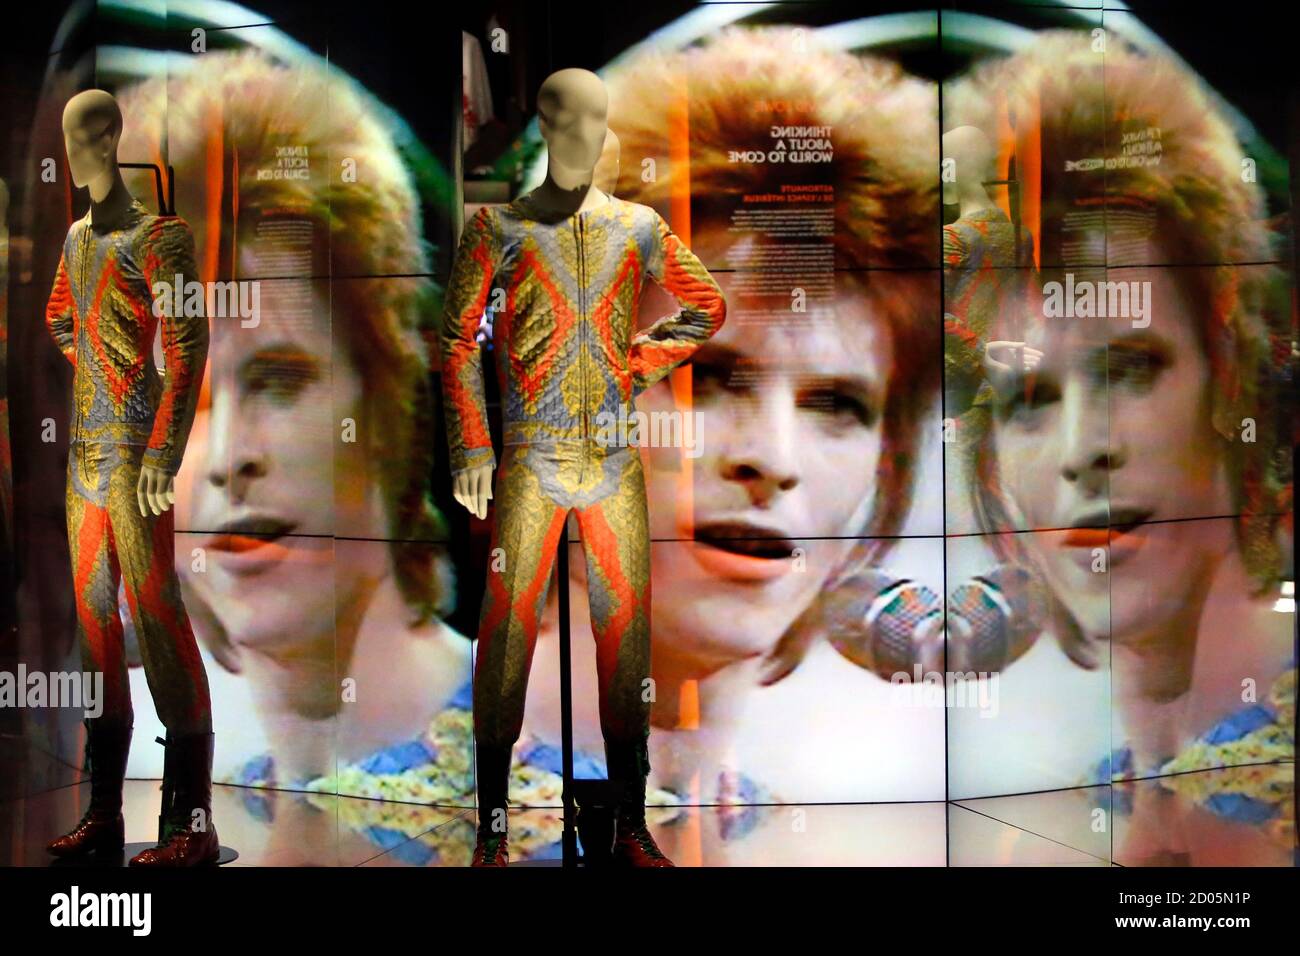 Two suits designed by Freddie Burretti (1972) for the Ziggy Stardust tour  are displayed in front of a video showing pop star David Bowie singing at  the BBC show Top of the